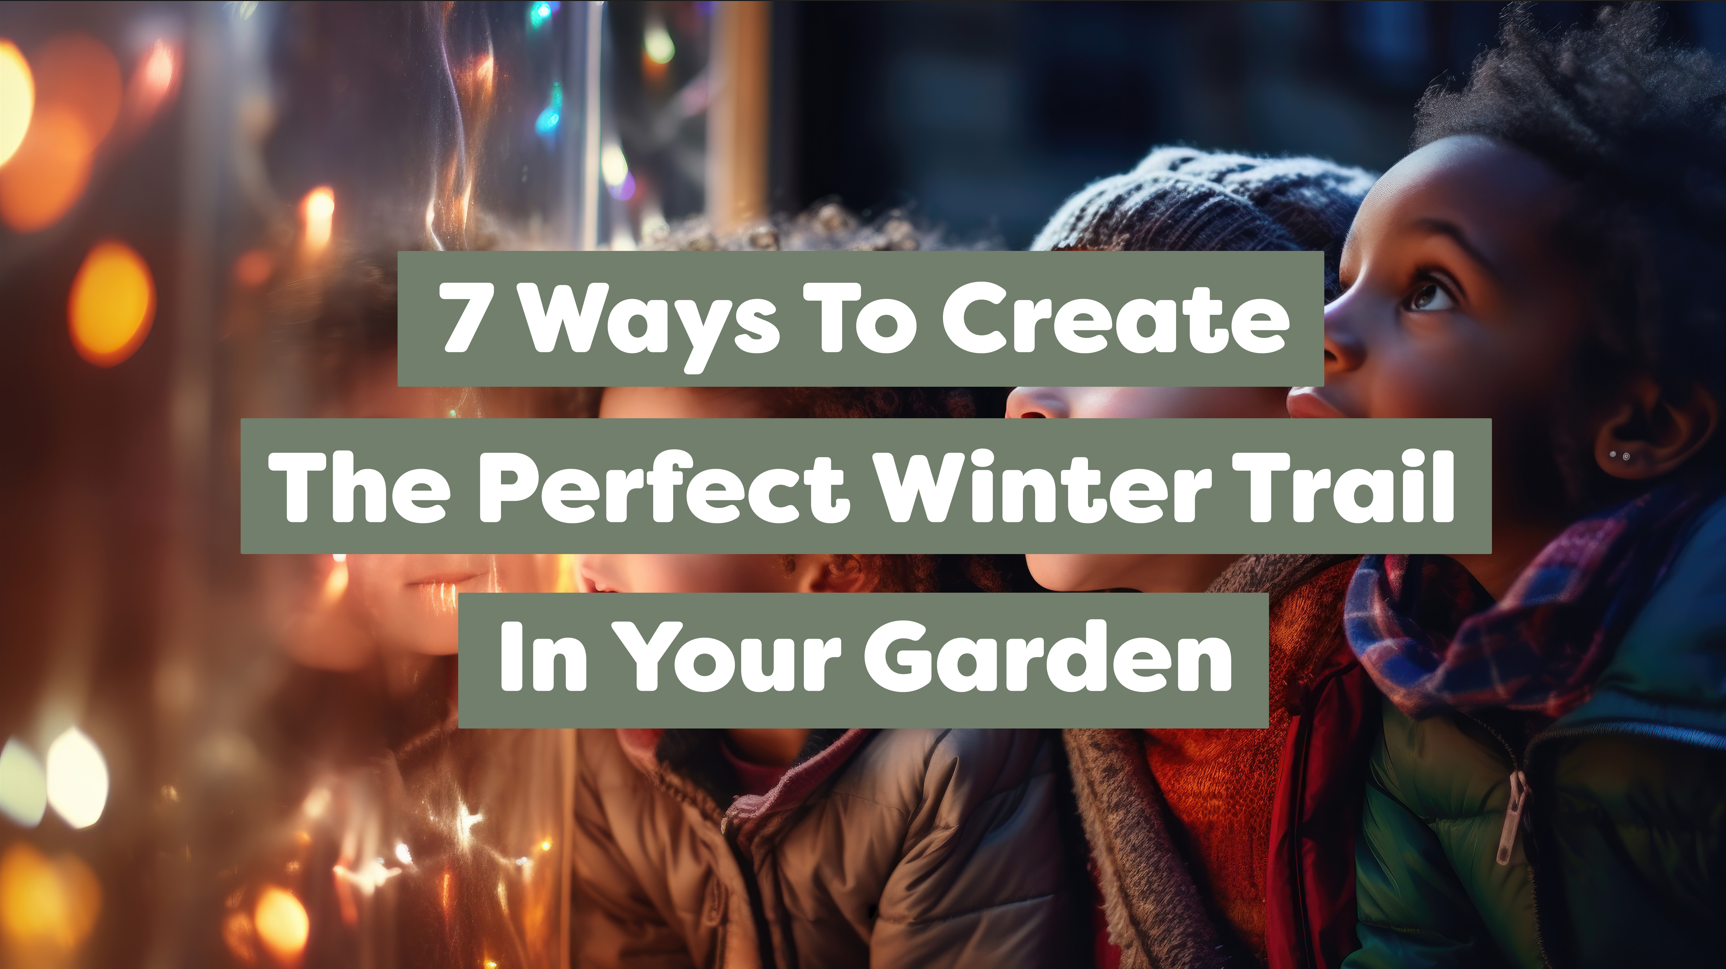 7 Ways to Create a Winter Trail in Your Garden